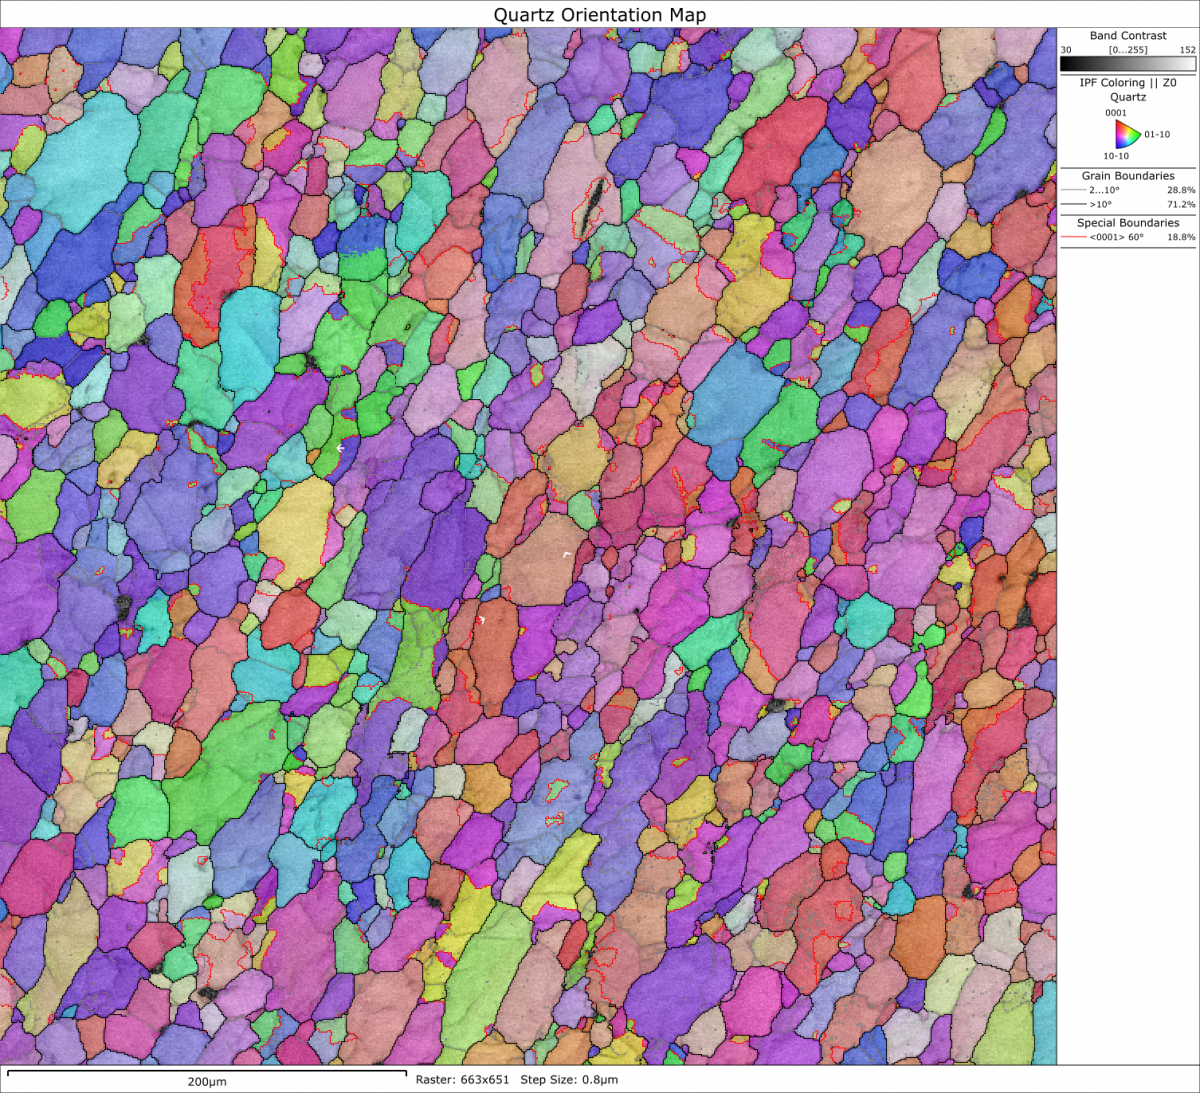 An EBSD orientation map of a quartz rock sample collected at high speed